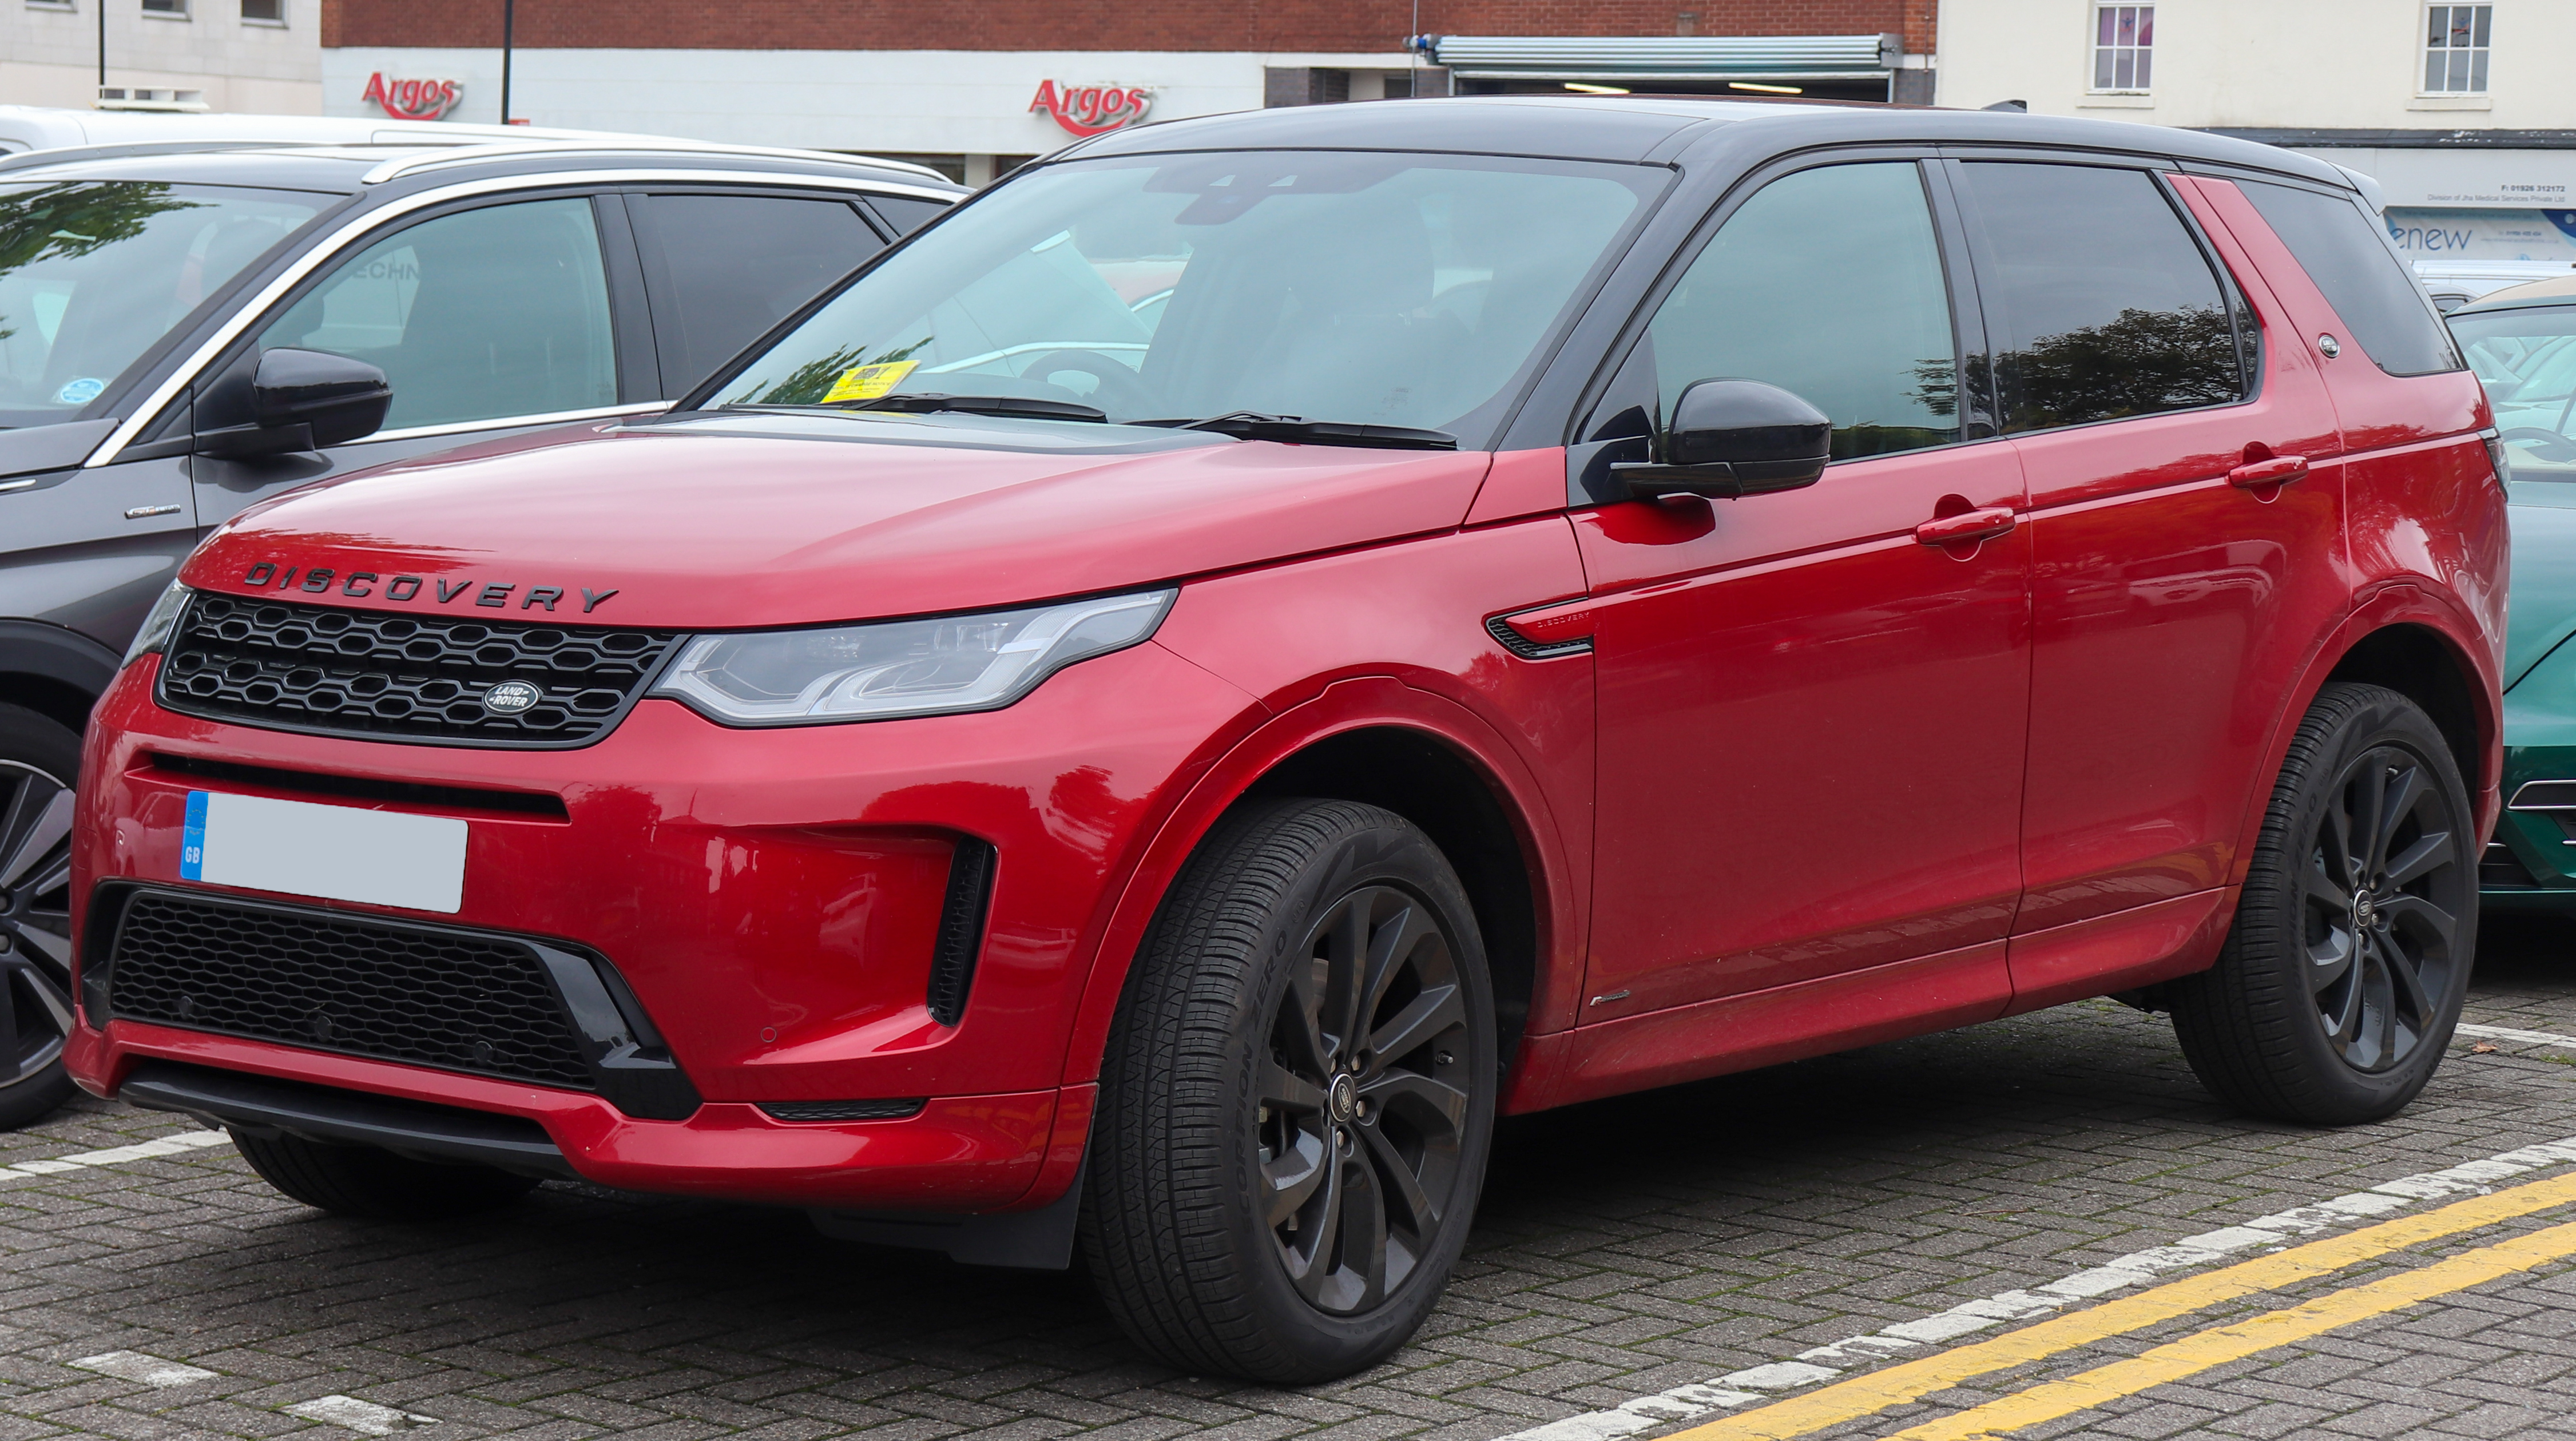 Which year model of Land Rover Discovery is best to buy used?